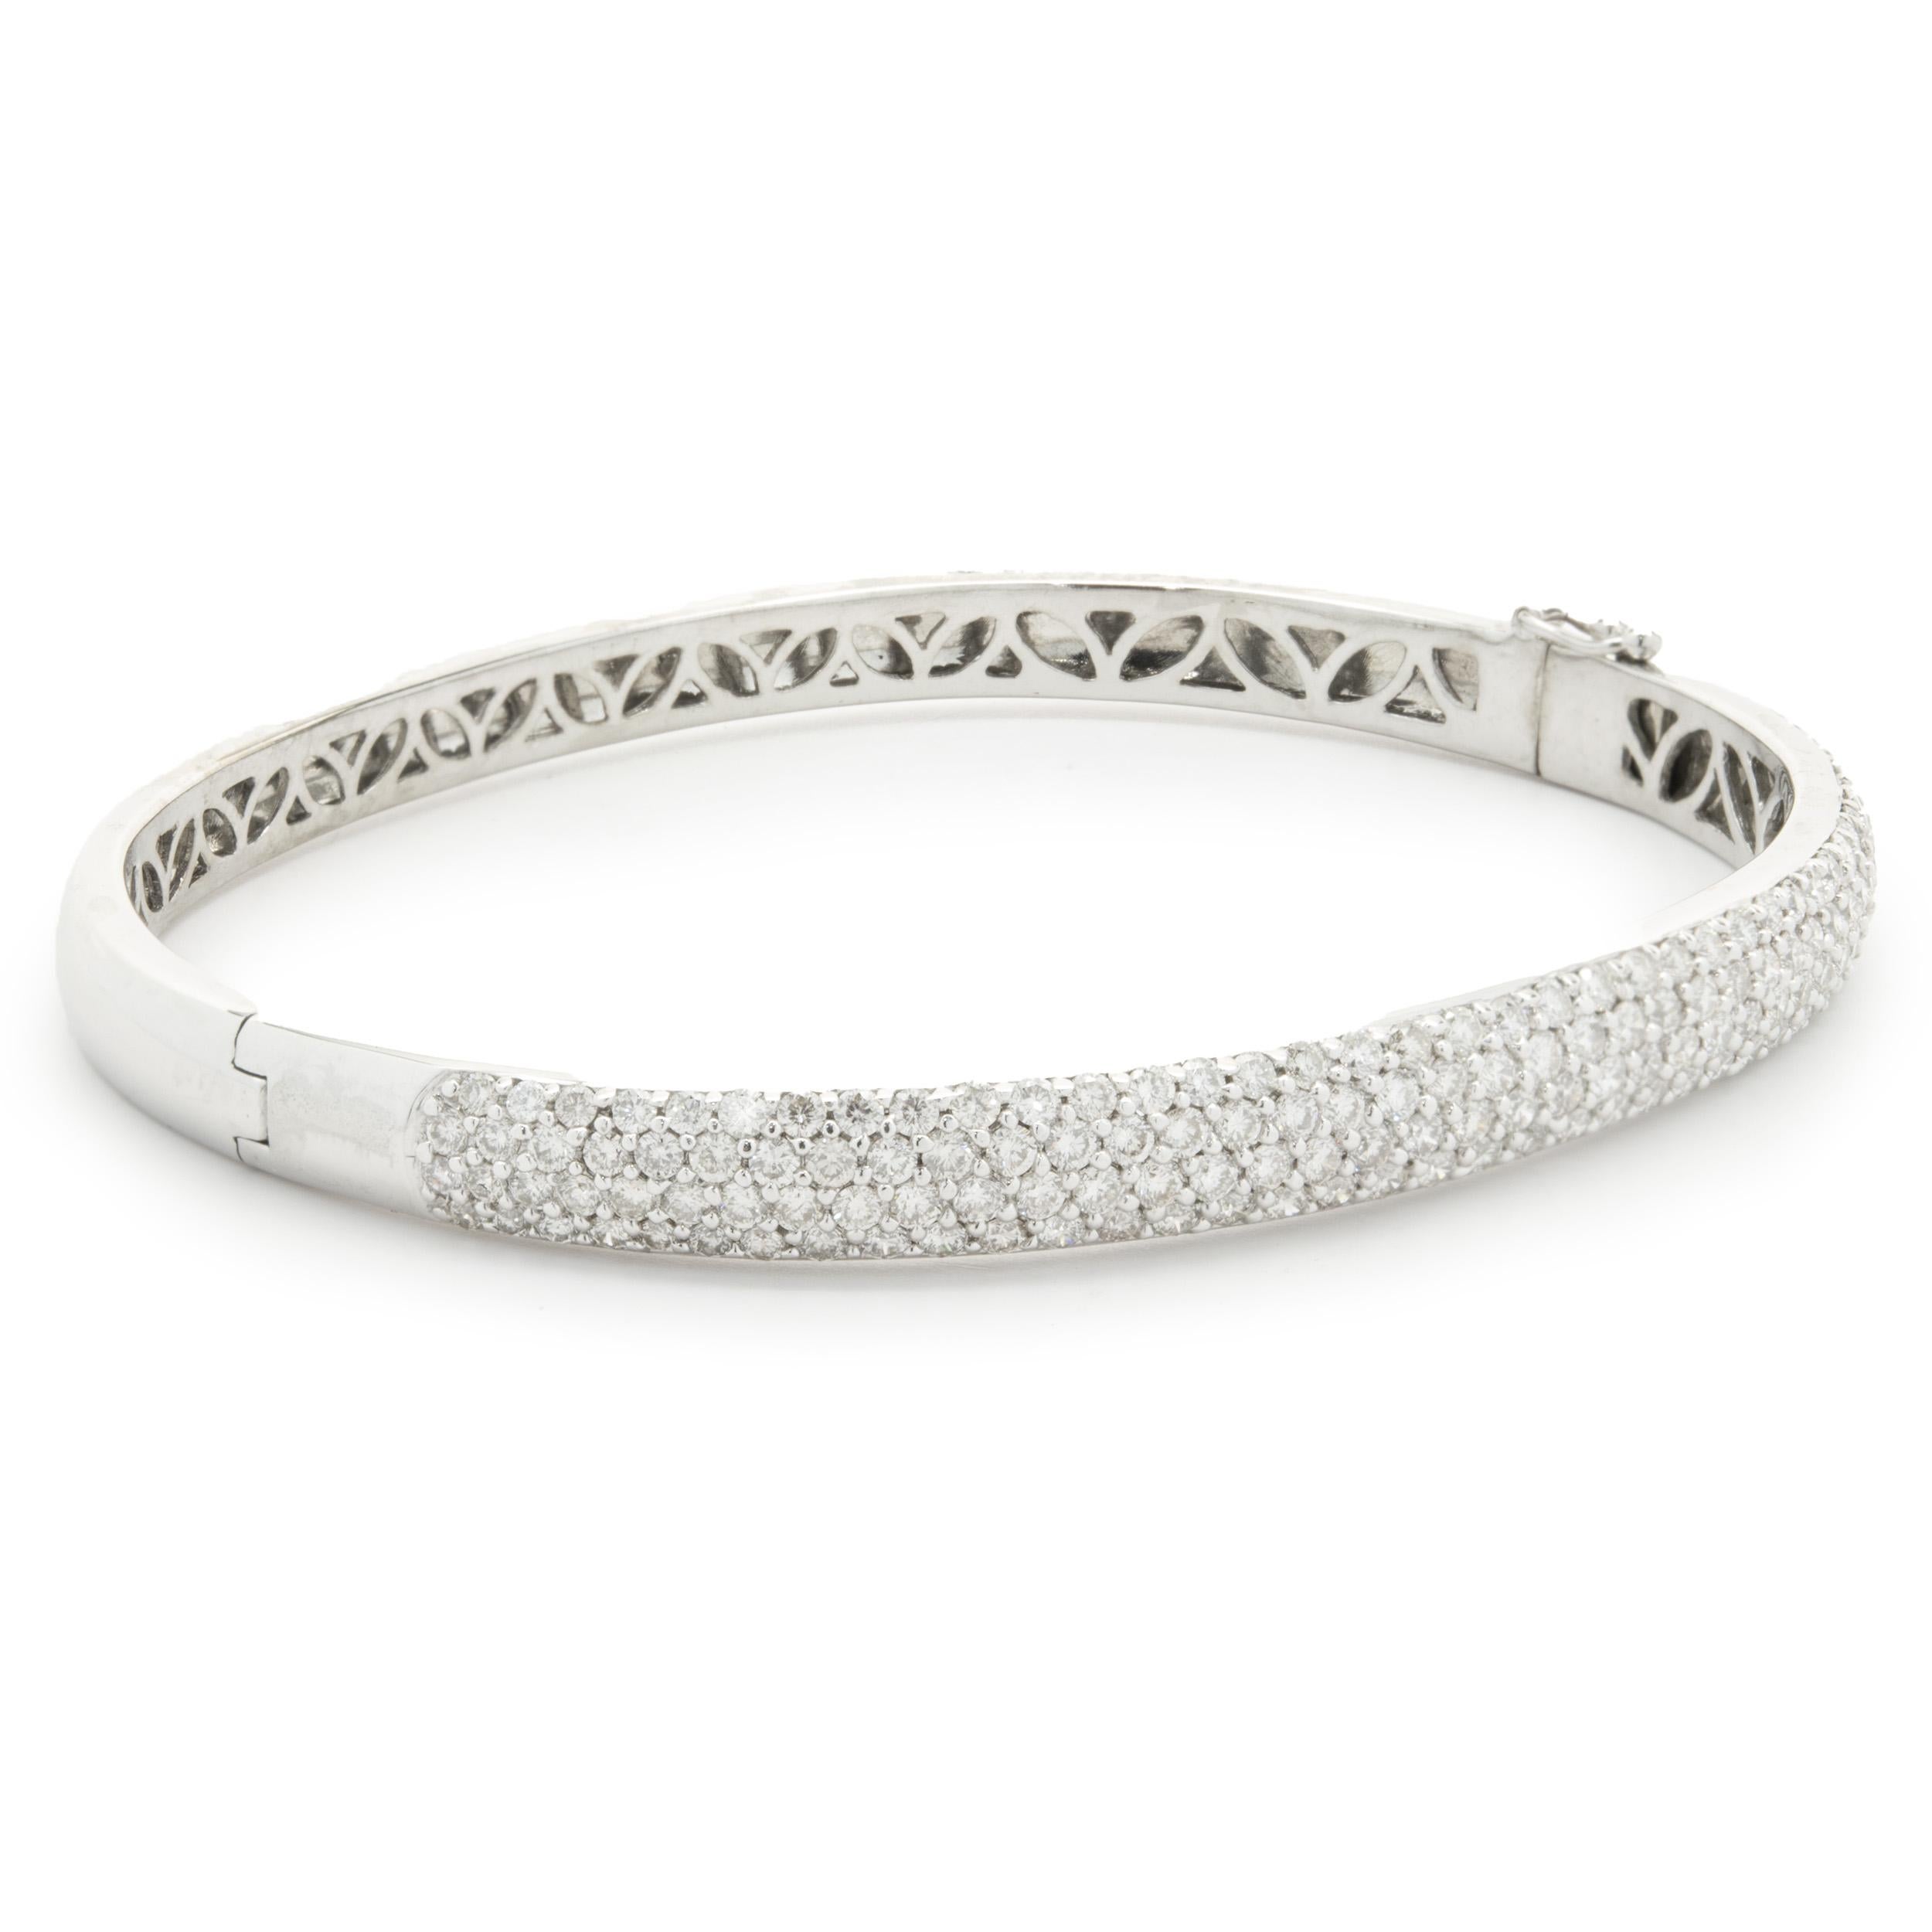 Designer: custom design
Material: 14K white gold
Diamonds: 172 round brilliant cut = 2.50cttw
Color: G
Clarity: SI2
Dimensions: bracelet will fit up to a 6.5-inch wrist
Weight: 17.45 grams